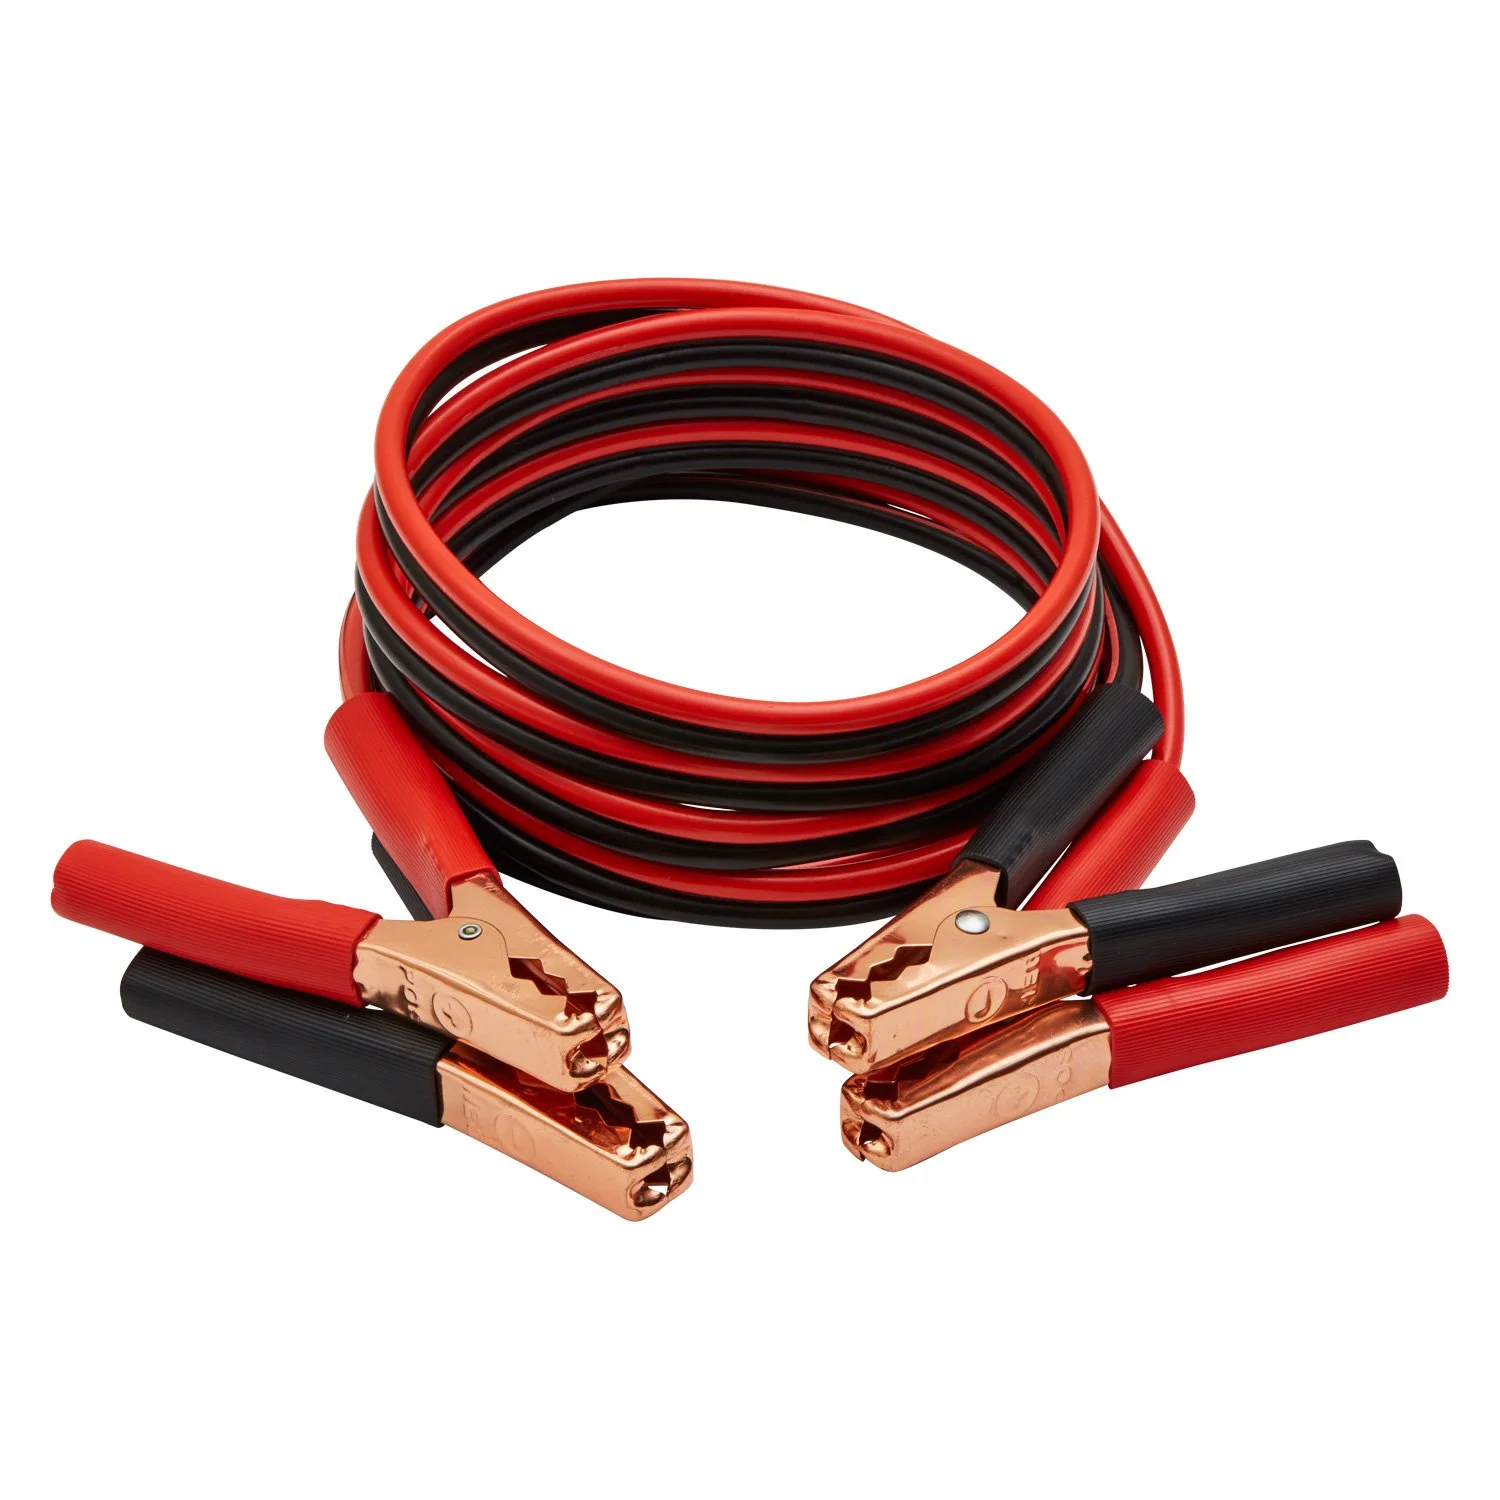 Auto Care Booster Cable - 20 Ft. Long, 4 Gauge Heavy Duty Jumper